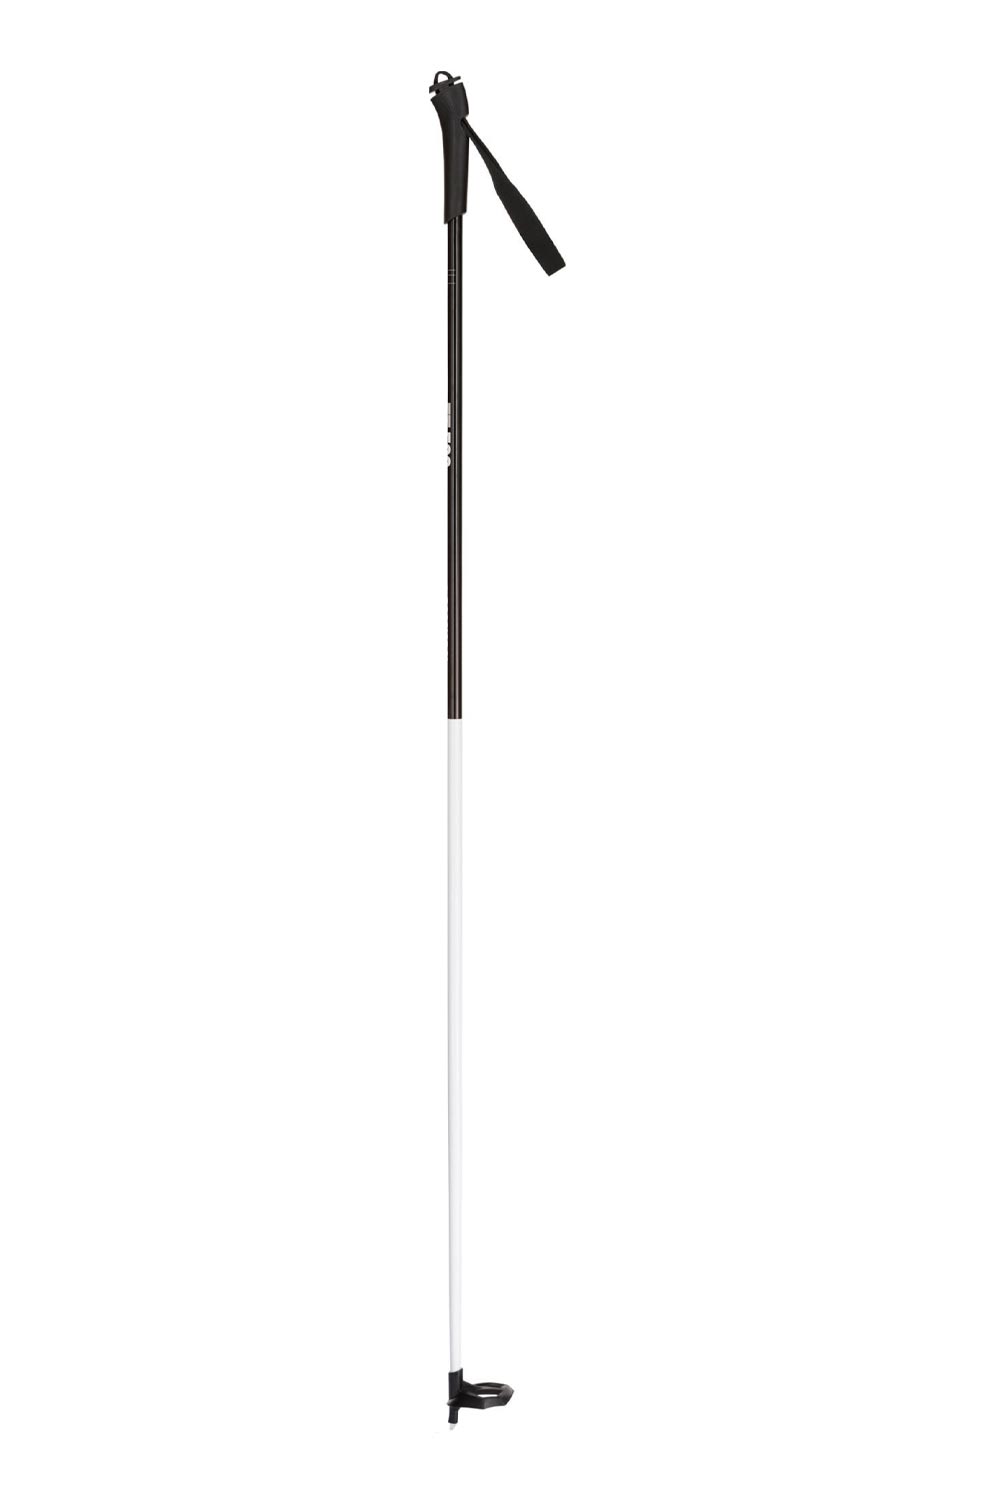 Rossignol FT-500 Cross Country Pole